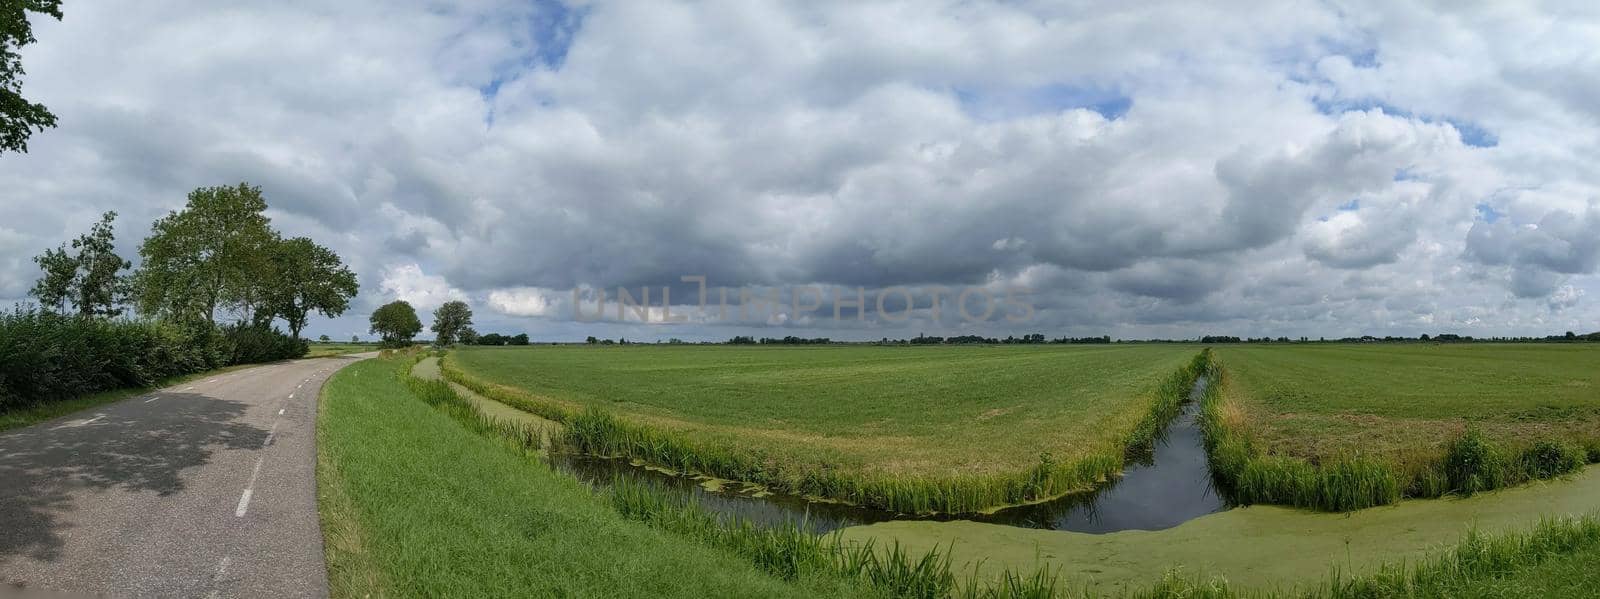 Cloudy Frisian panoramic landscape in The Netherlands